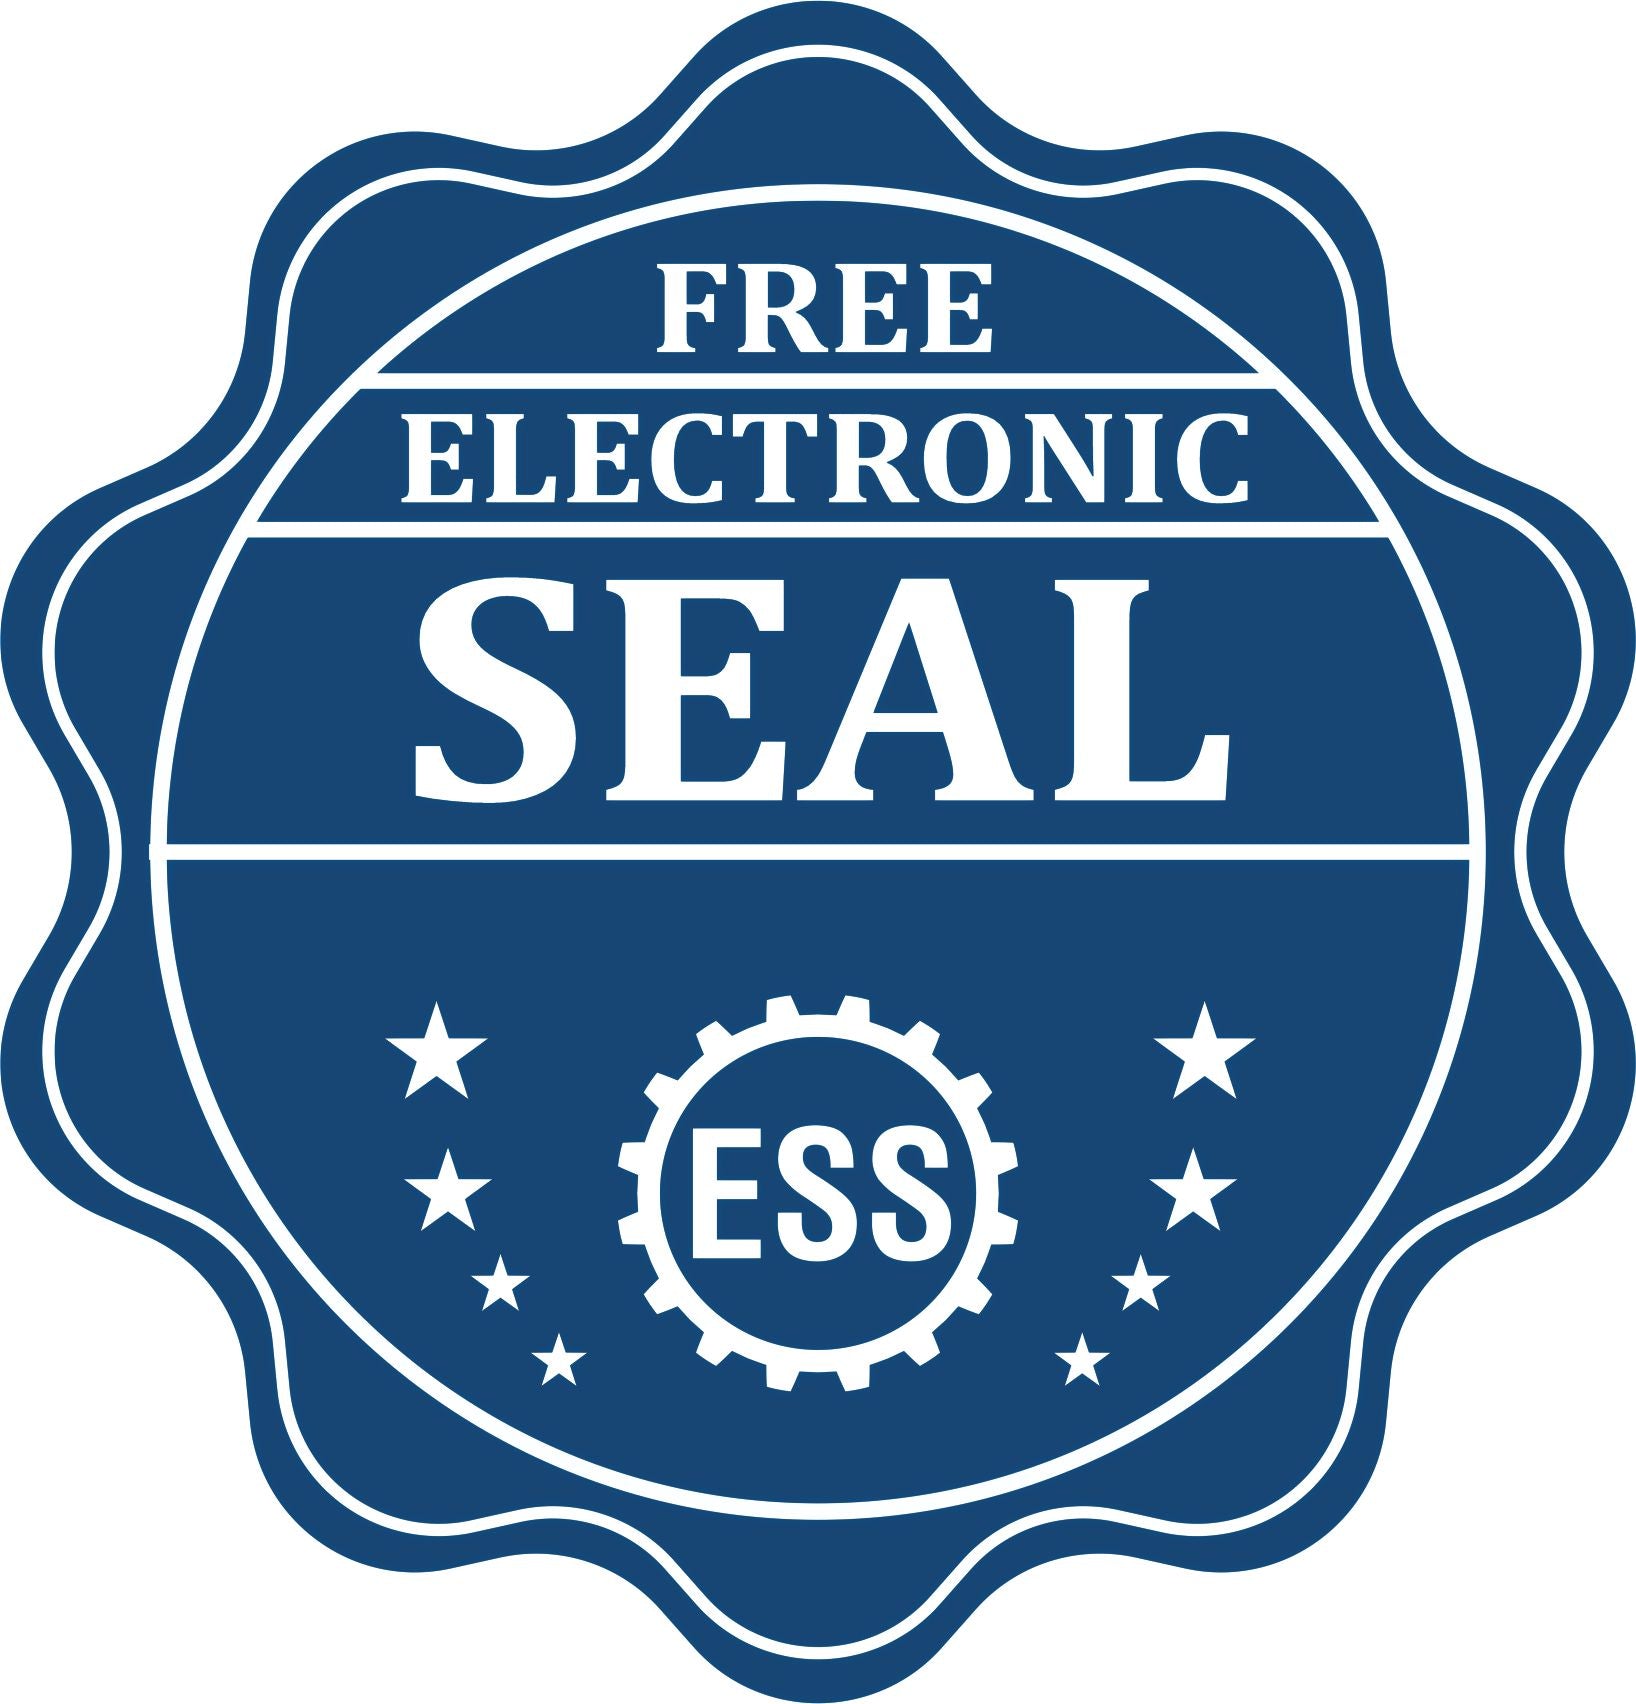 A badge showing a free electronic seal for the Super Slim Pennsylvania Notary Public Stamp with stars and the ESS gear on the emblem.